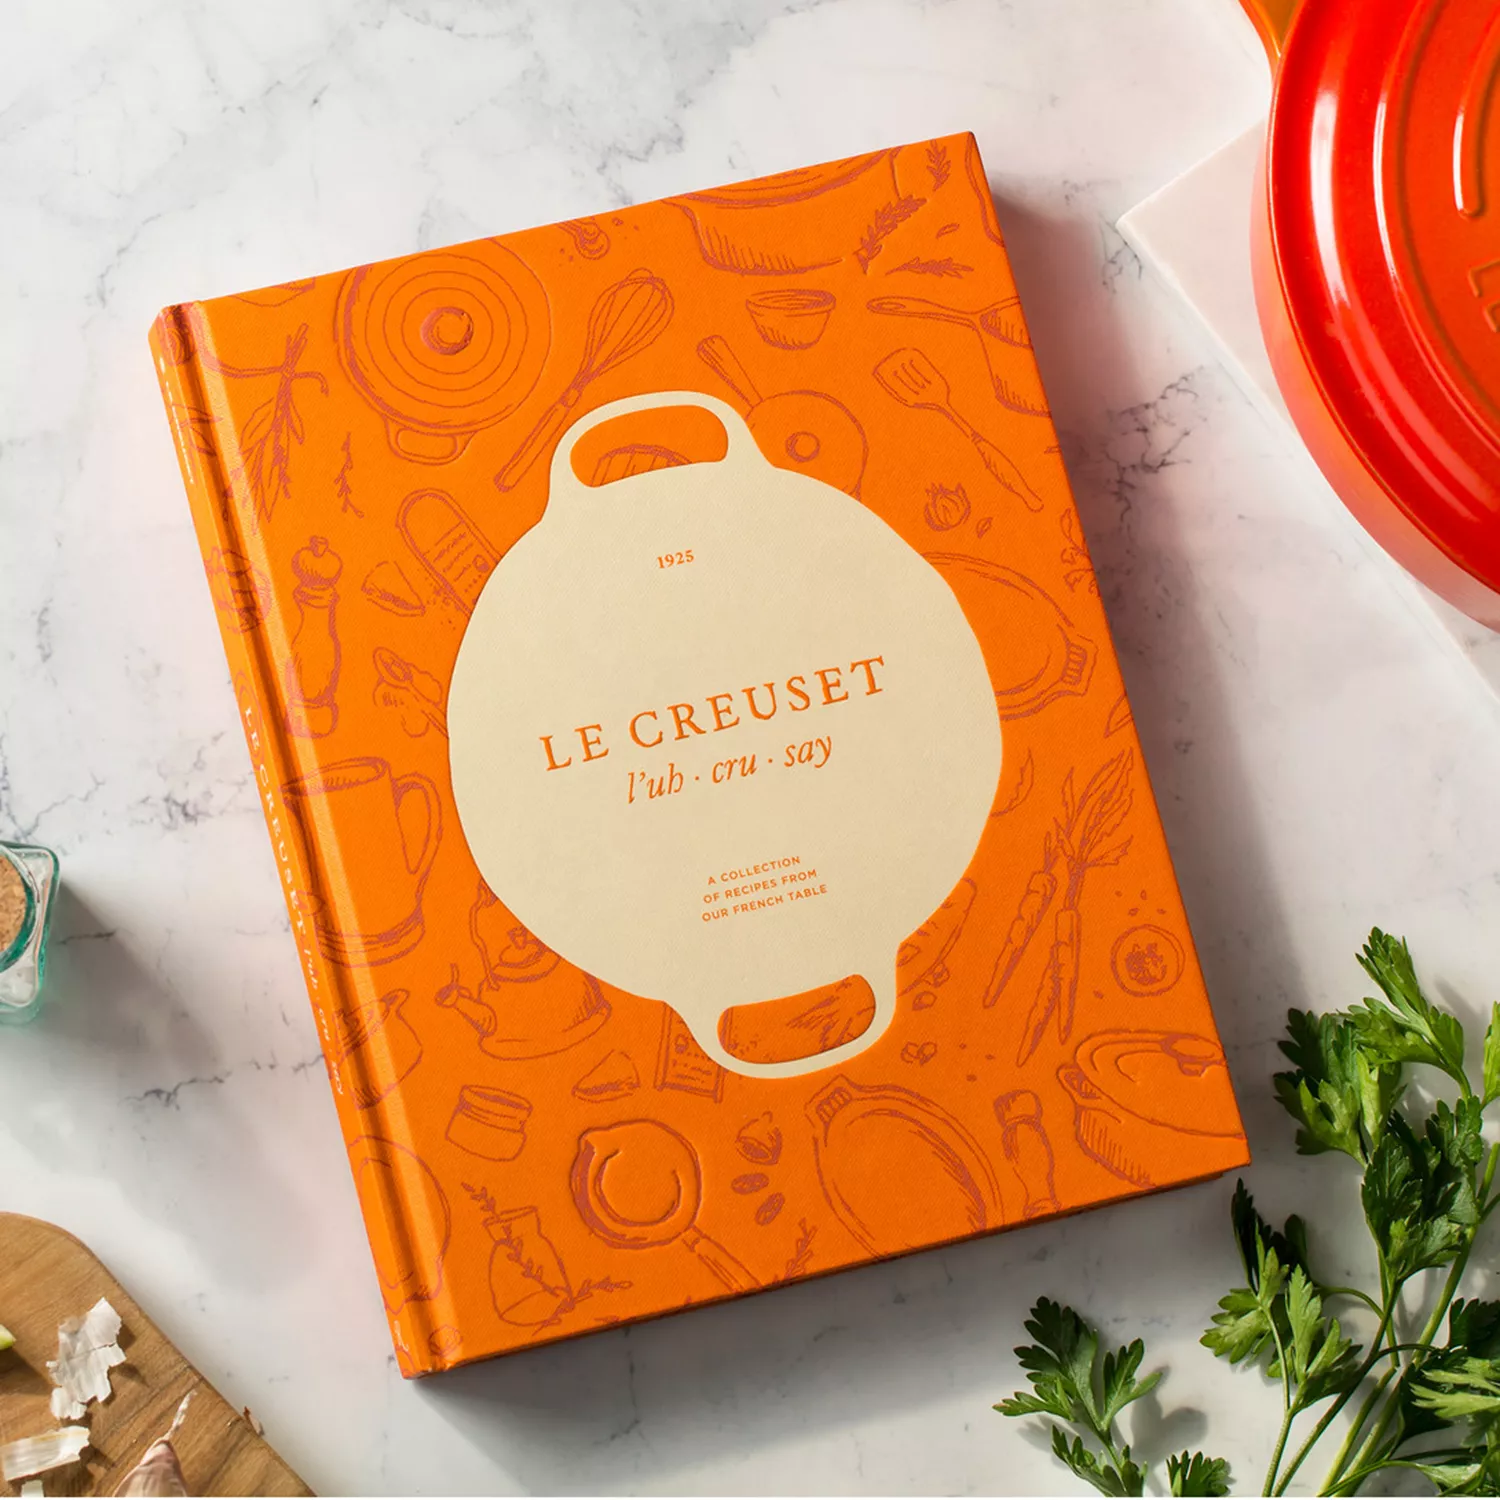 Le Creuset Cookbook: A Collection of Recipes from Our French Table